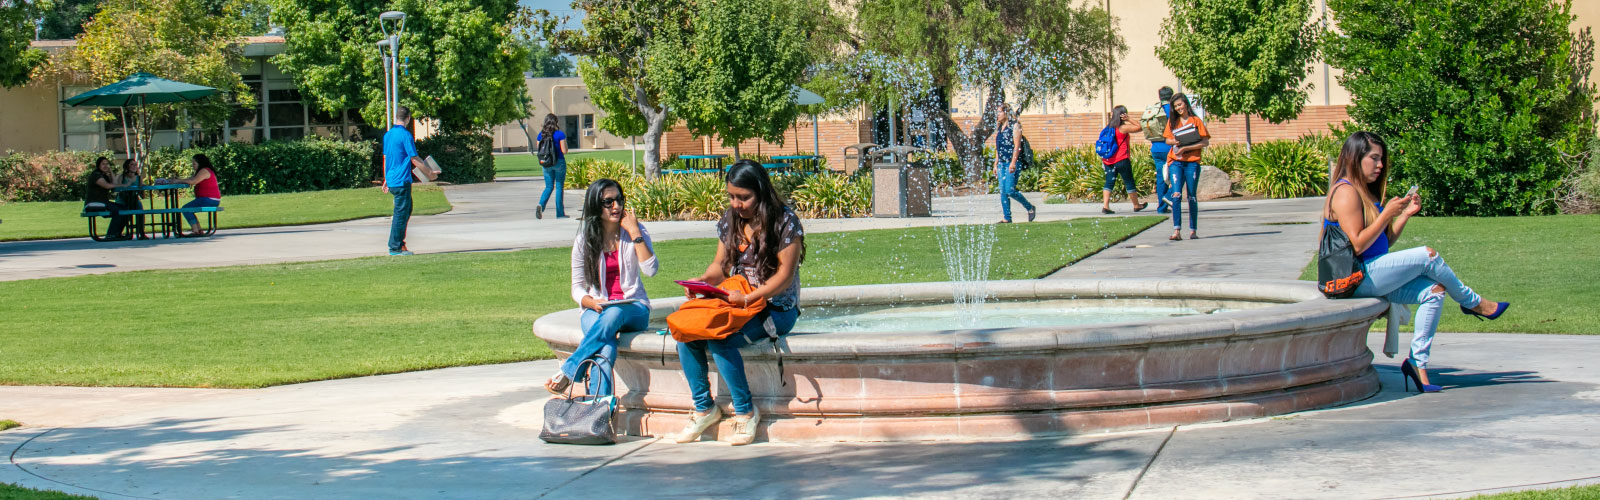 Students sitting at fountain